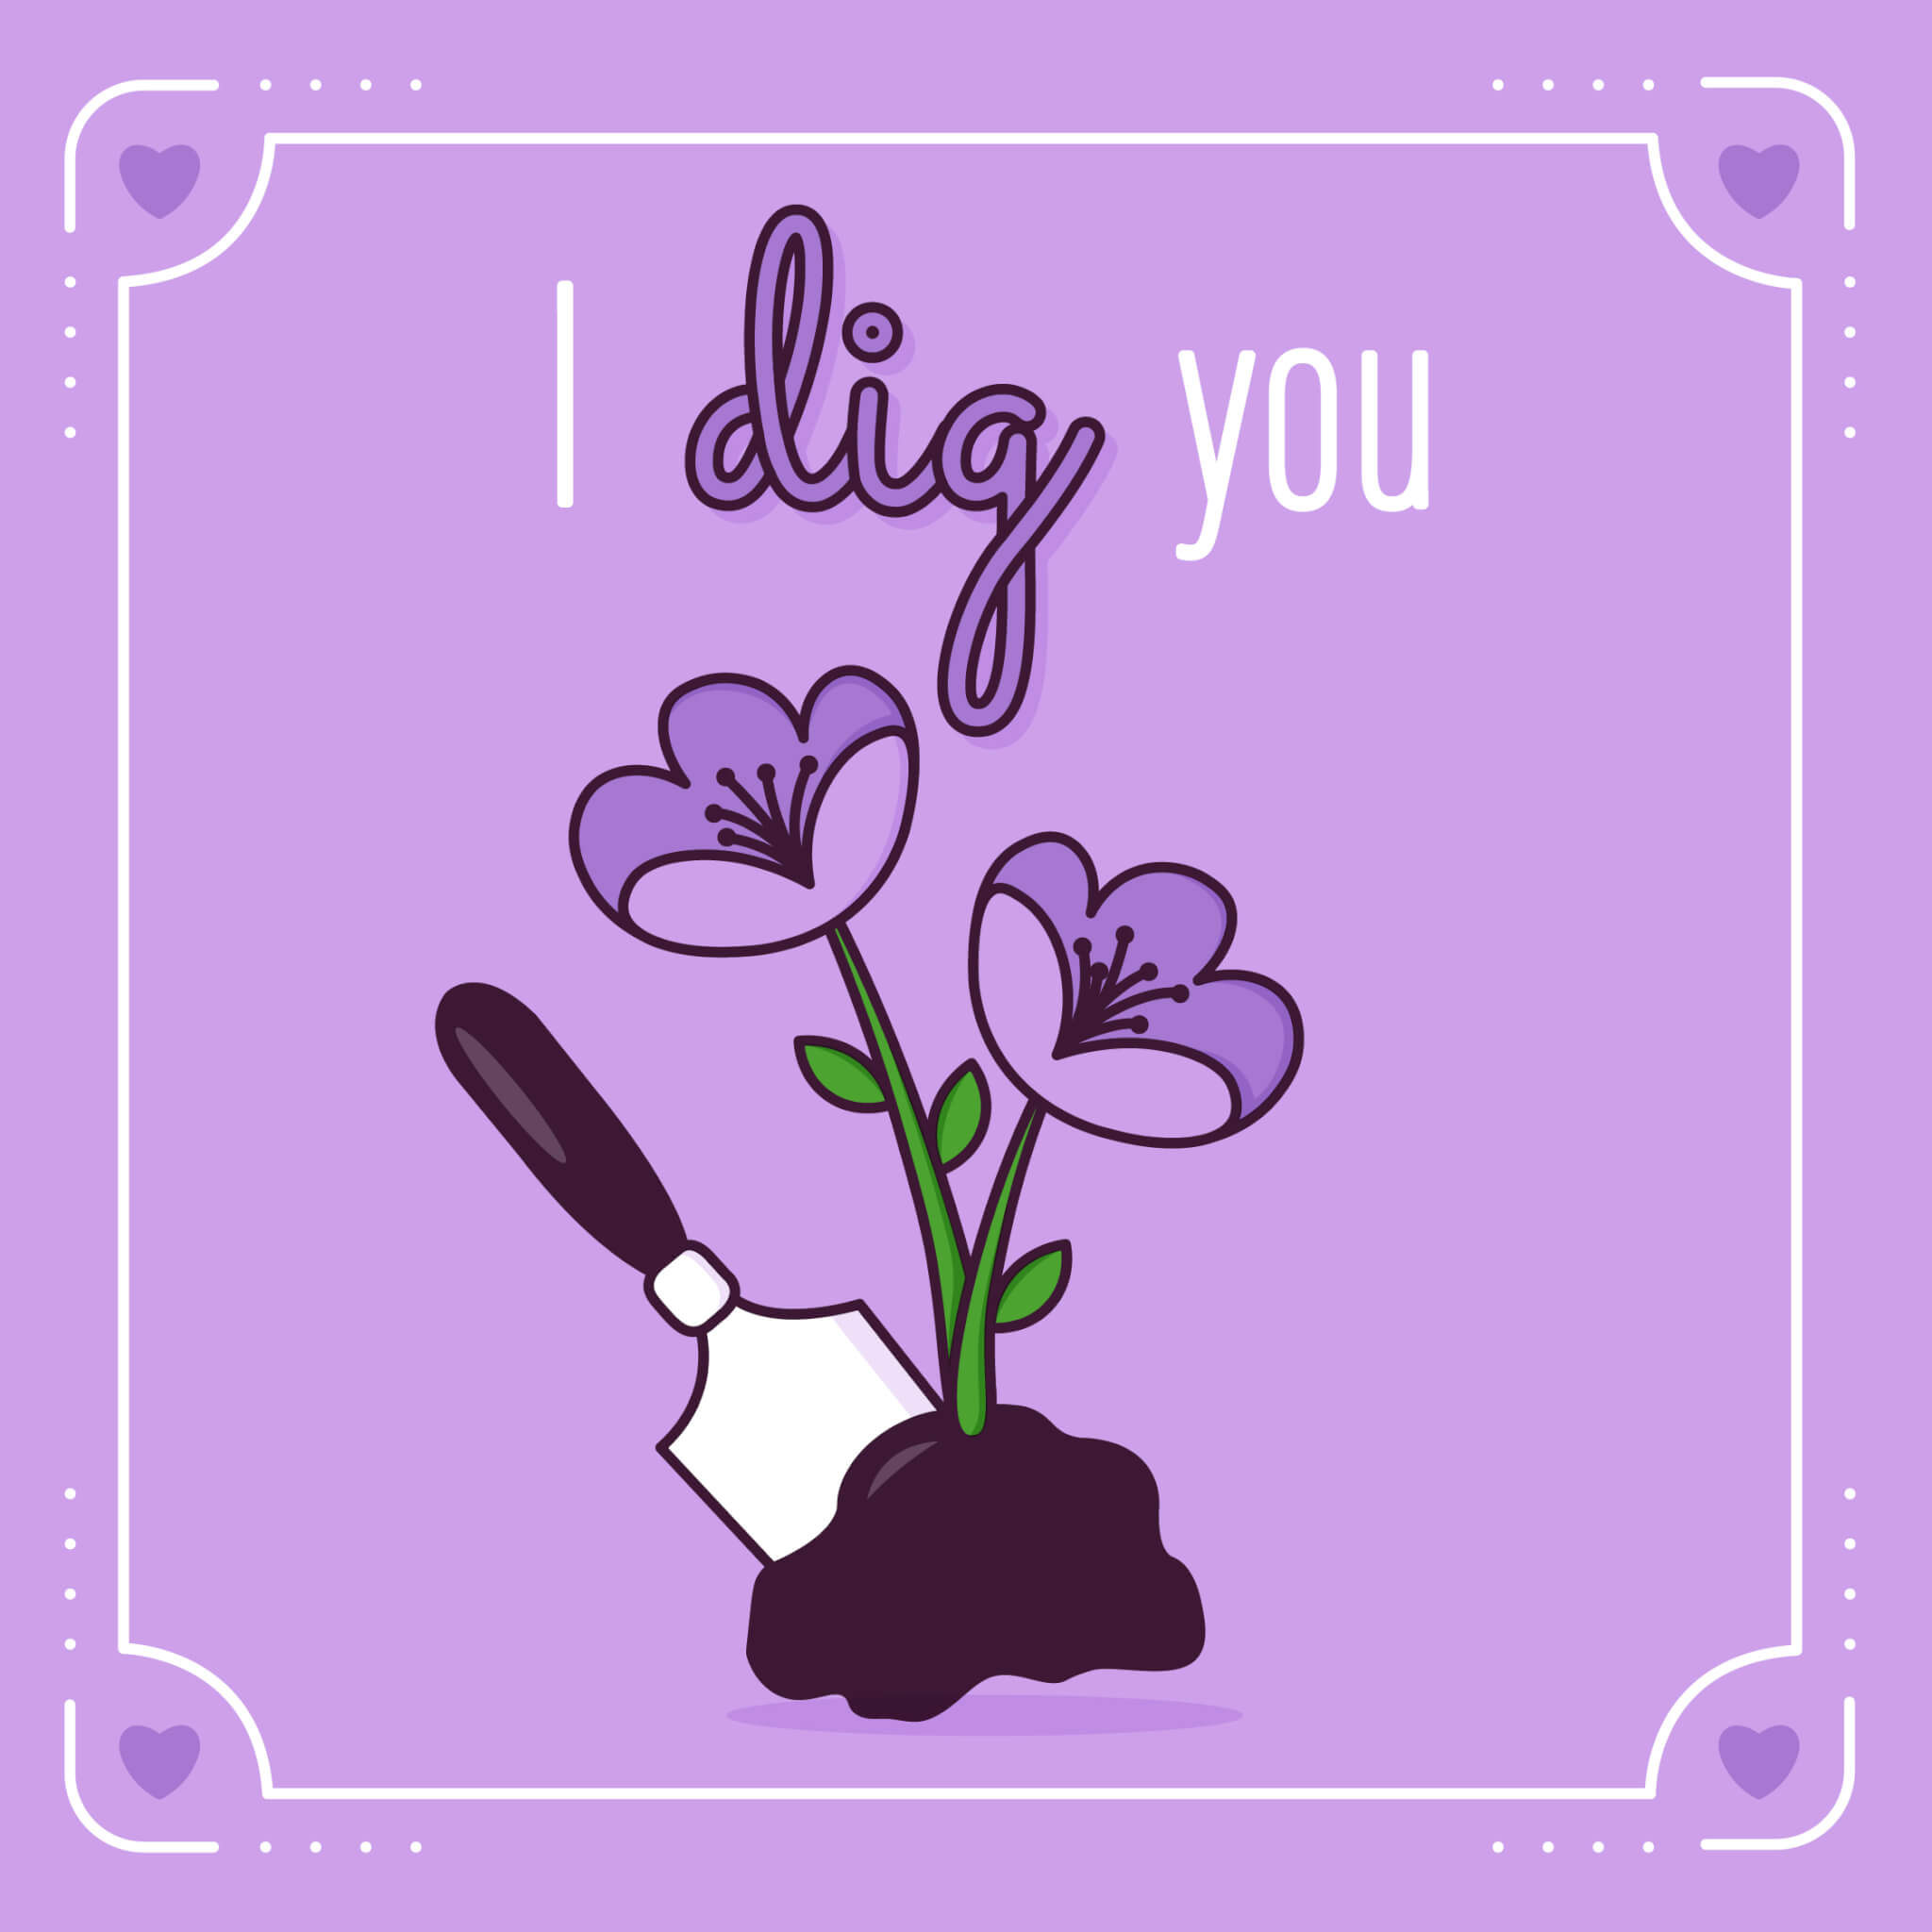 Cartoon image of a plant with purple flowers